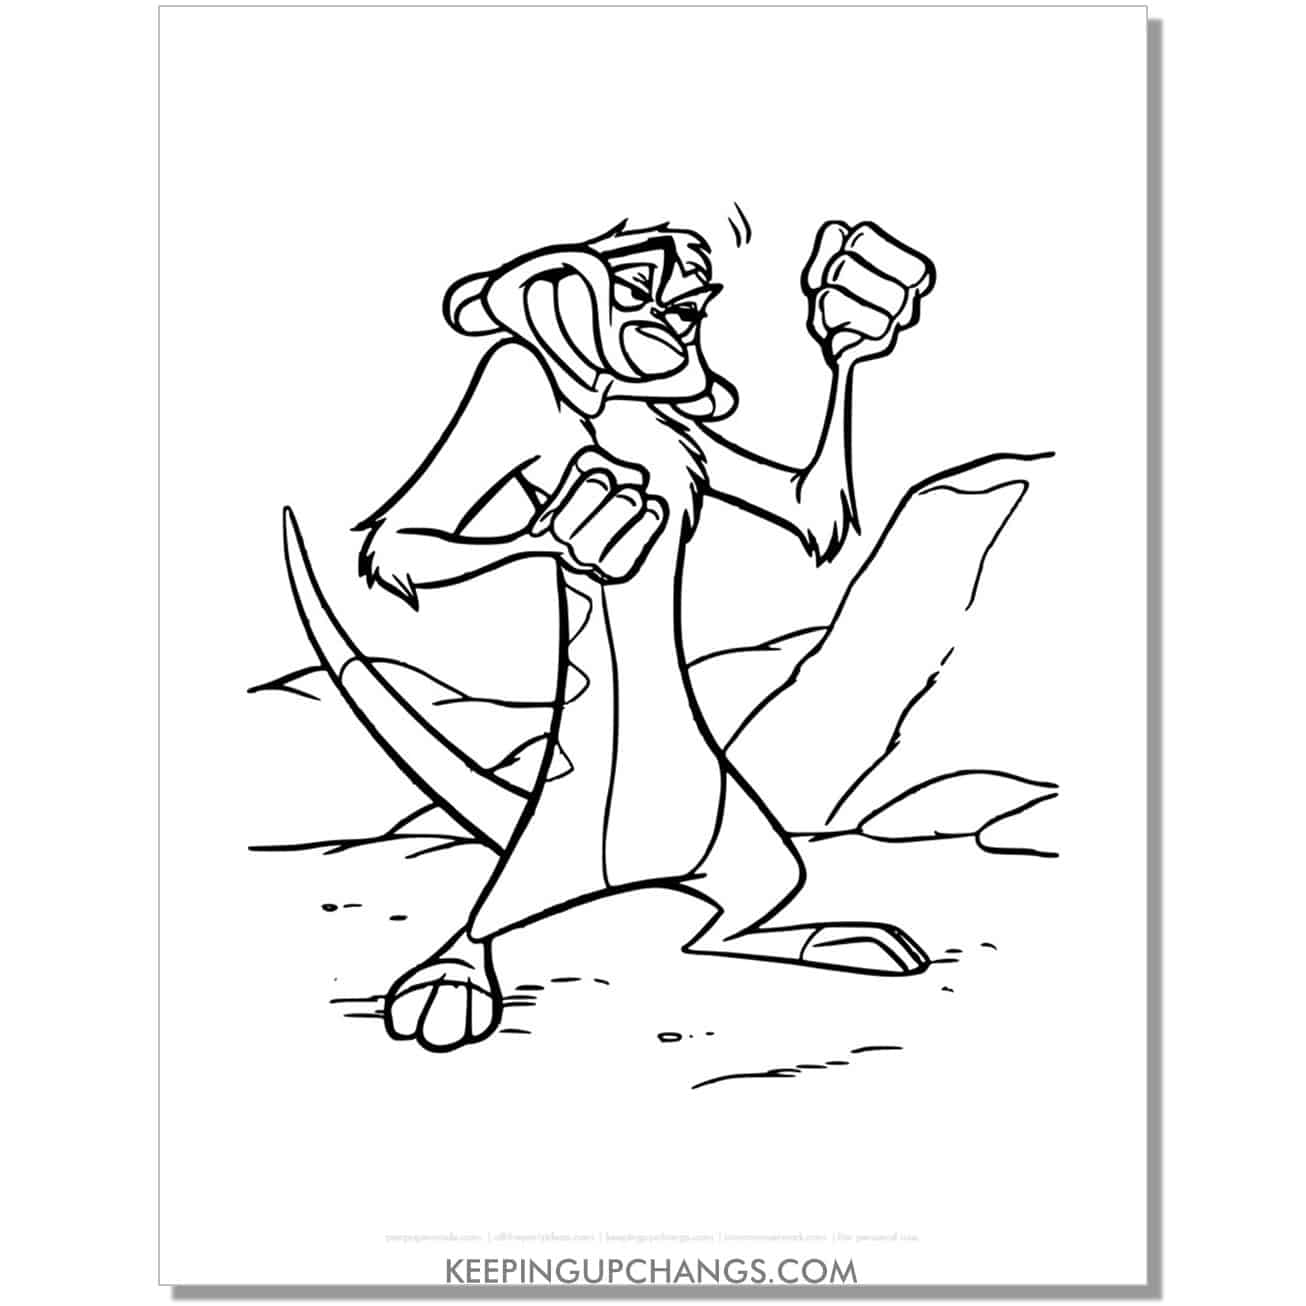 timon with hands in fists lion king coloring page, sheet.